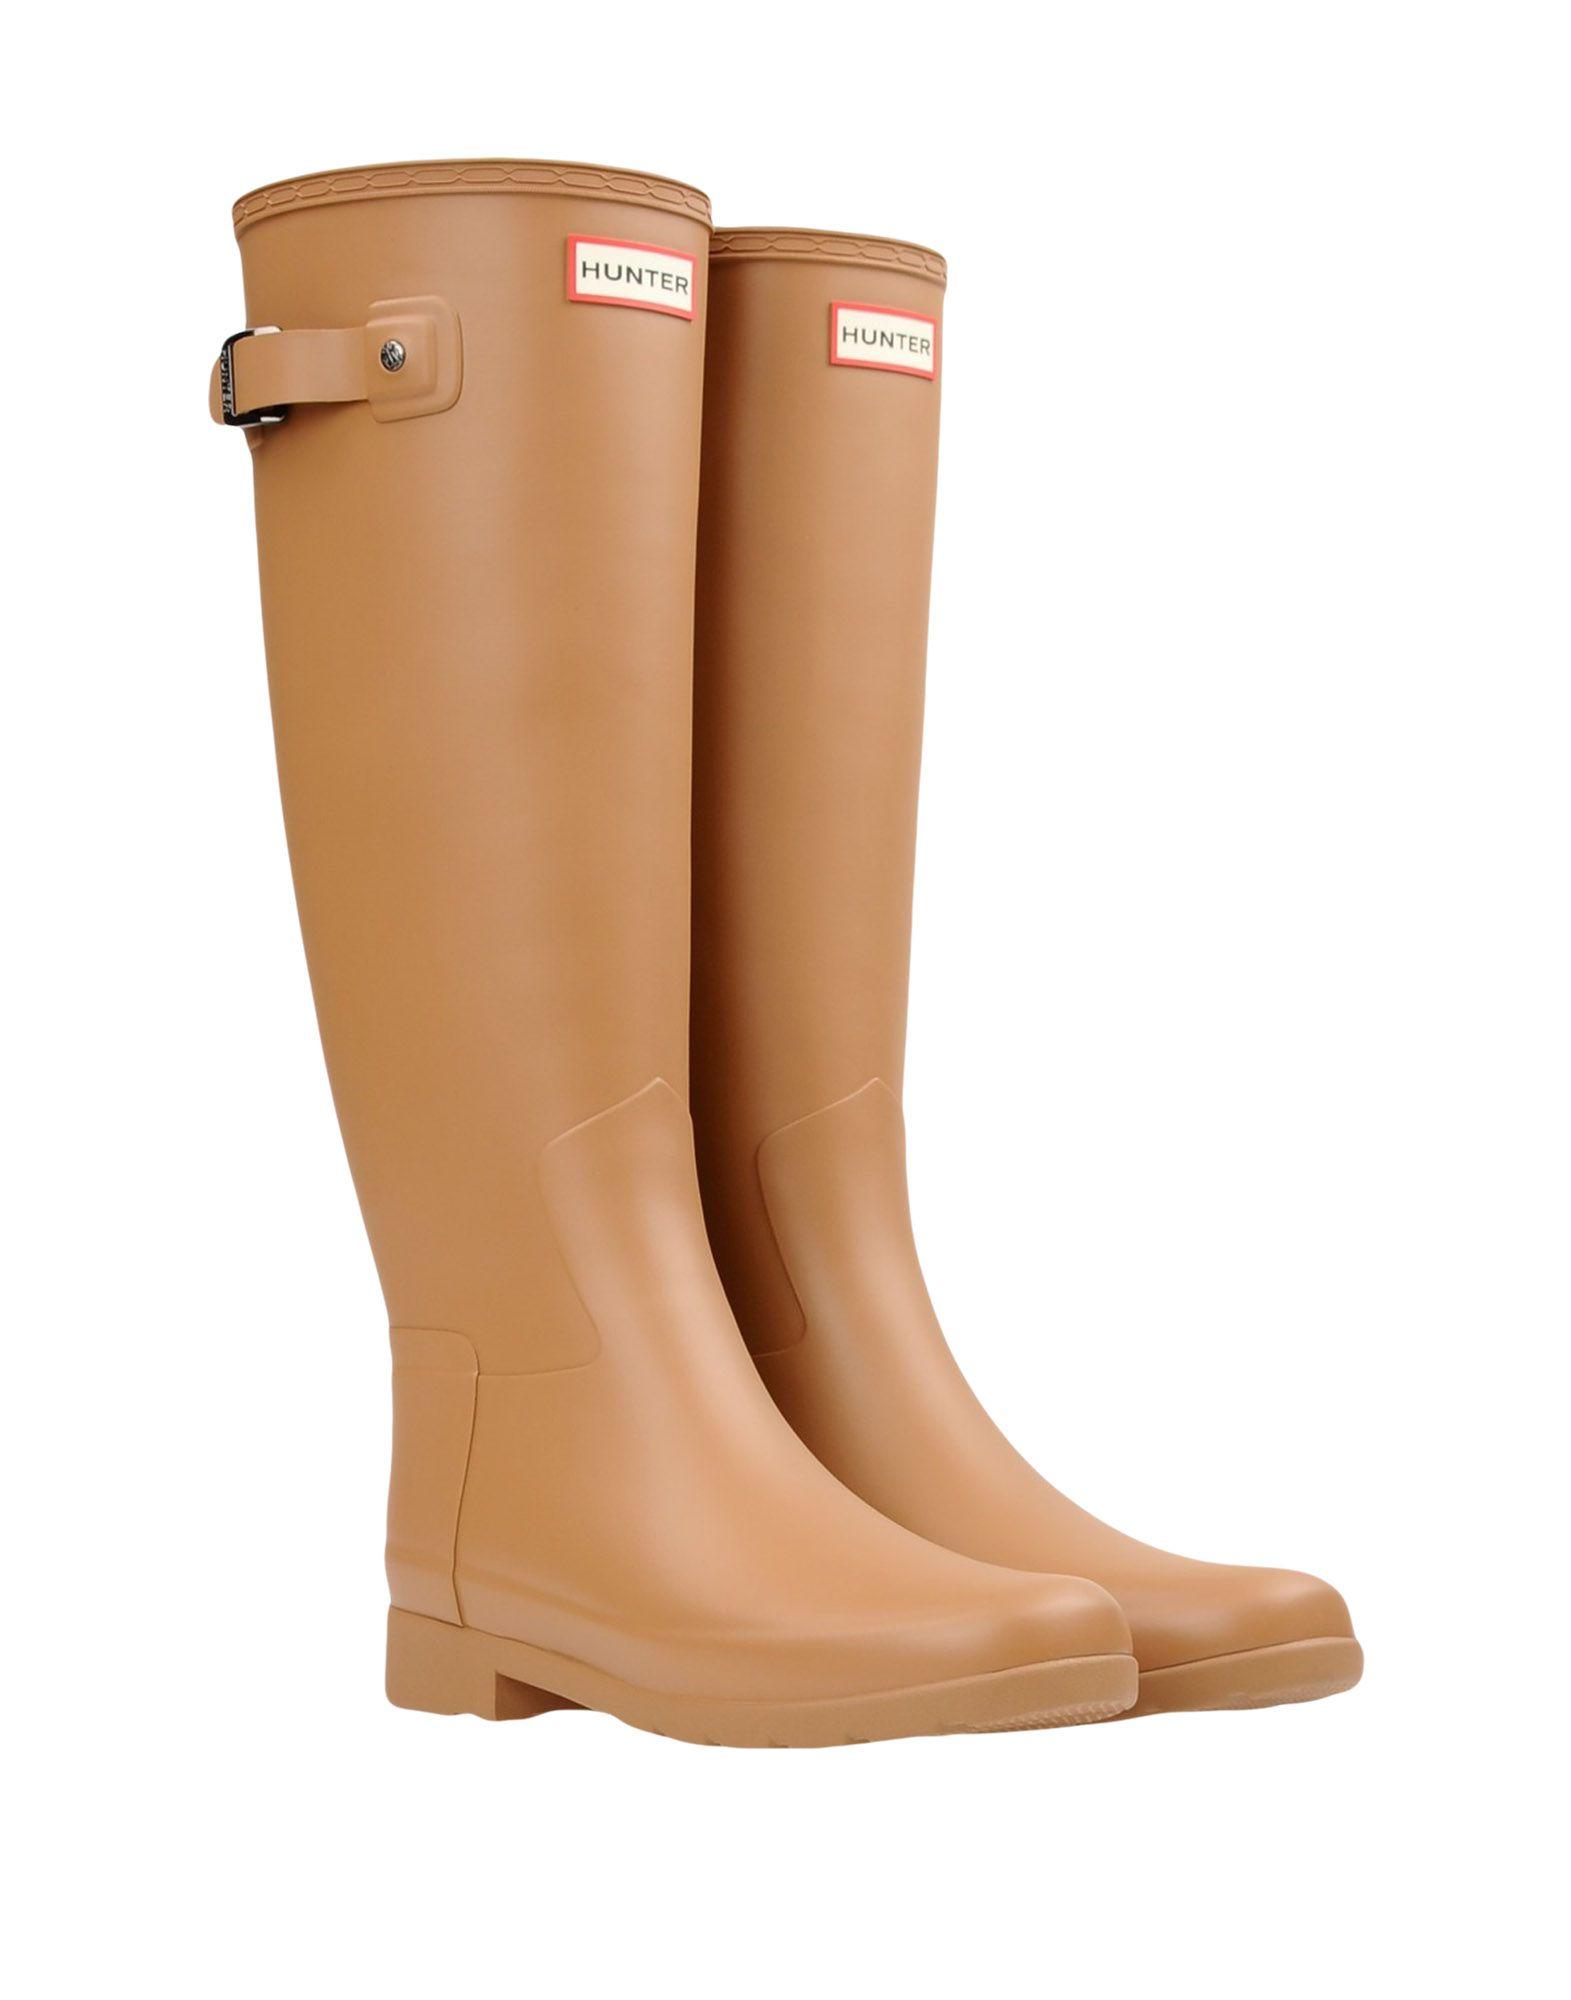 HUNTER Rubber Knee Boots in Camel (Brown) | Lyst